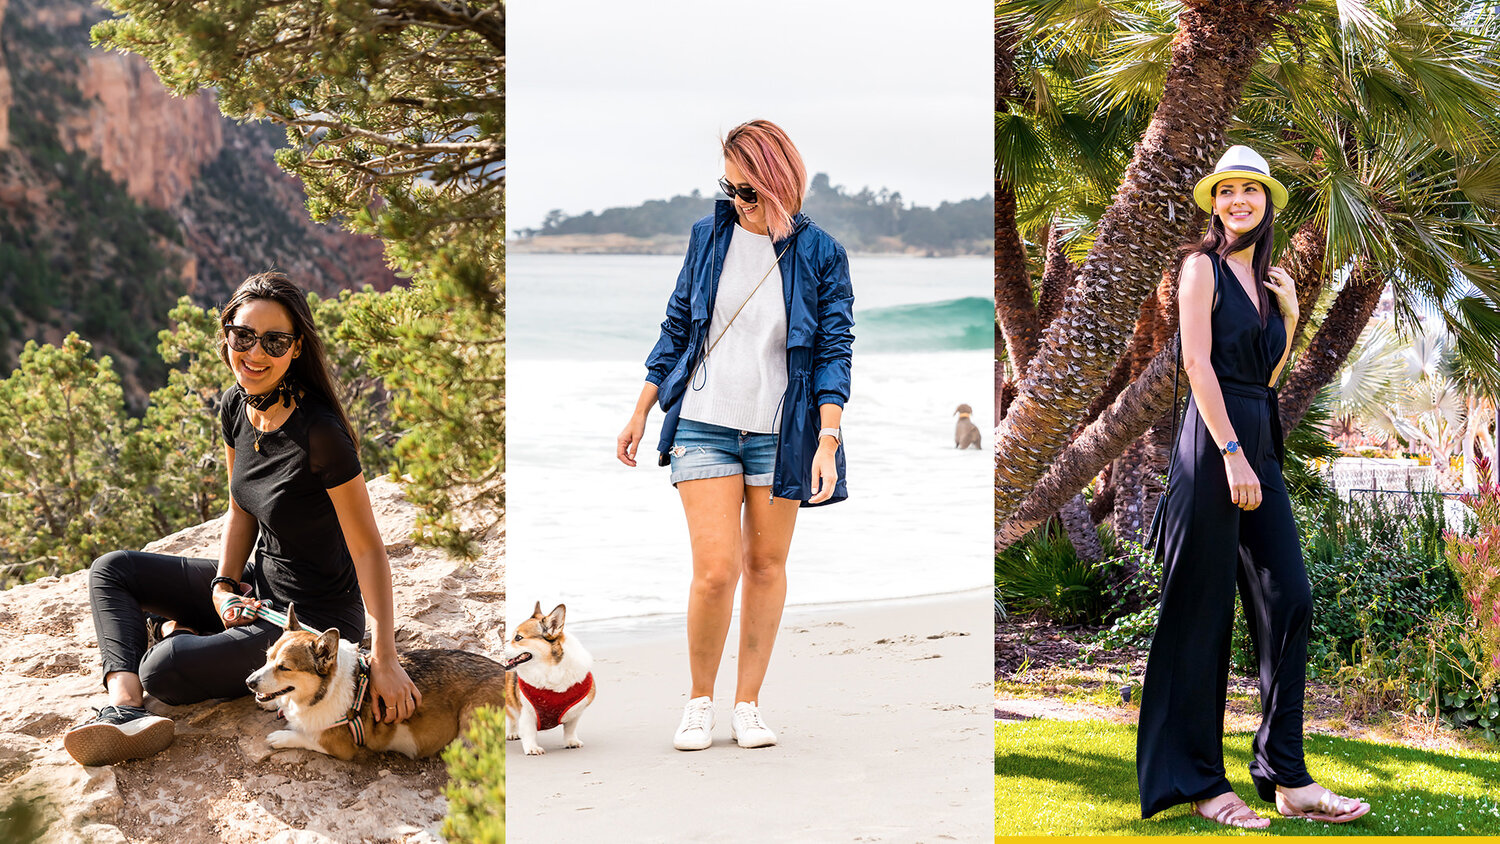 Stylish & Comfortable Summer Outfits For Your Road Trip with Anatomie -  Travel Pockets